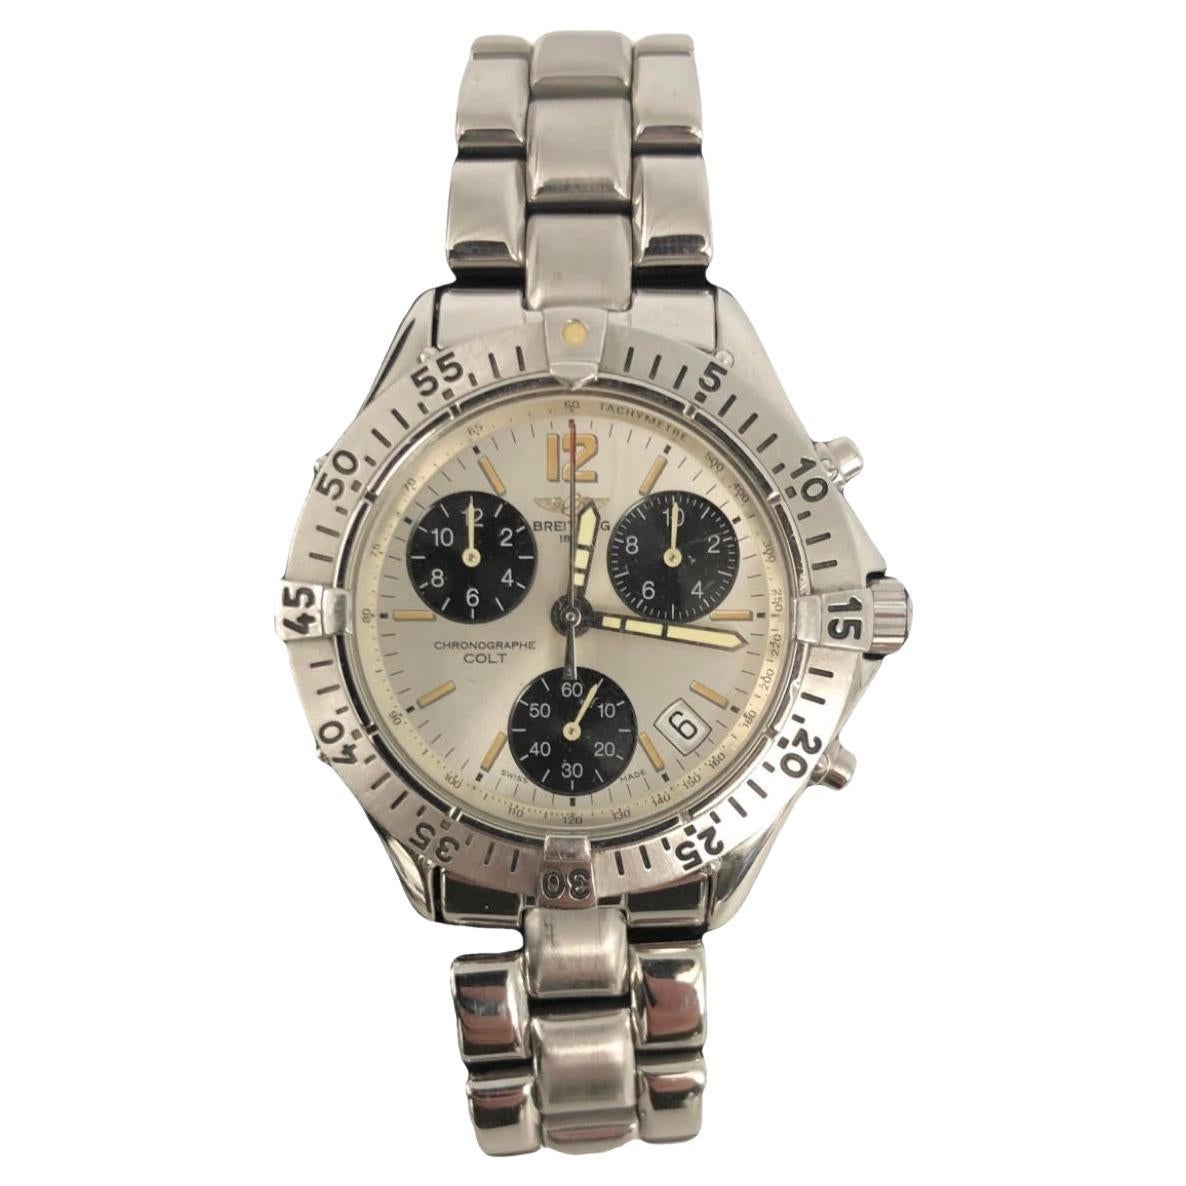 Is Breitling Colt a good watch?